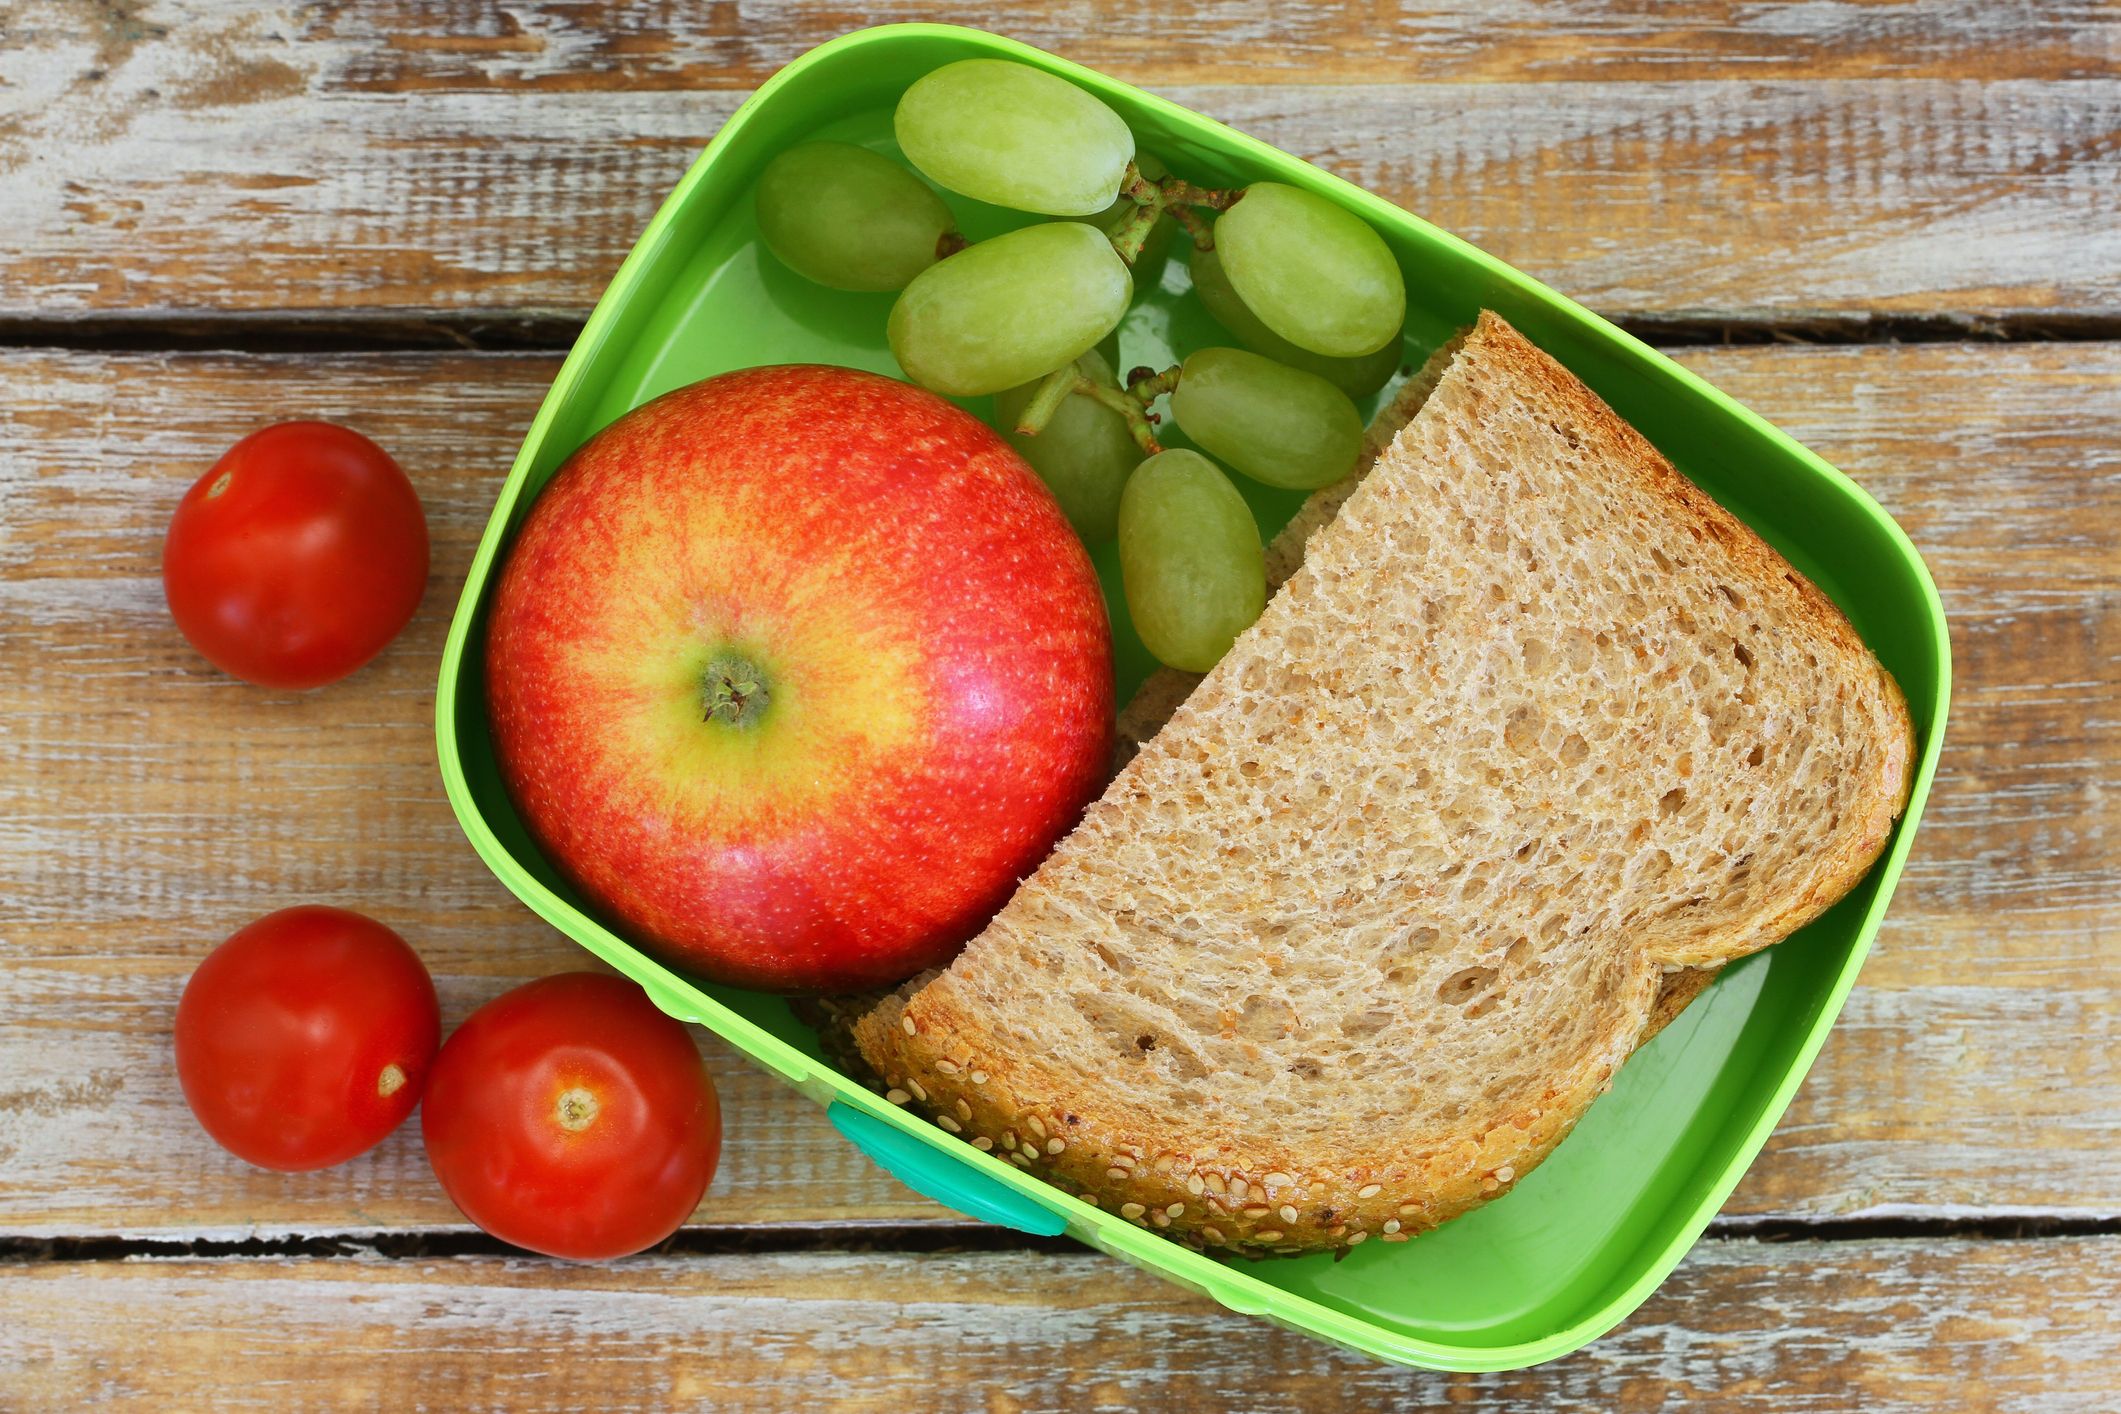 Lunch box consisting of wholegrain sandwich, fruit and cherry tomatoes